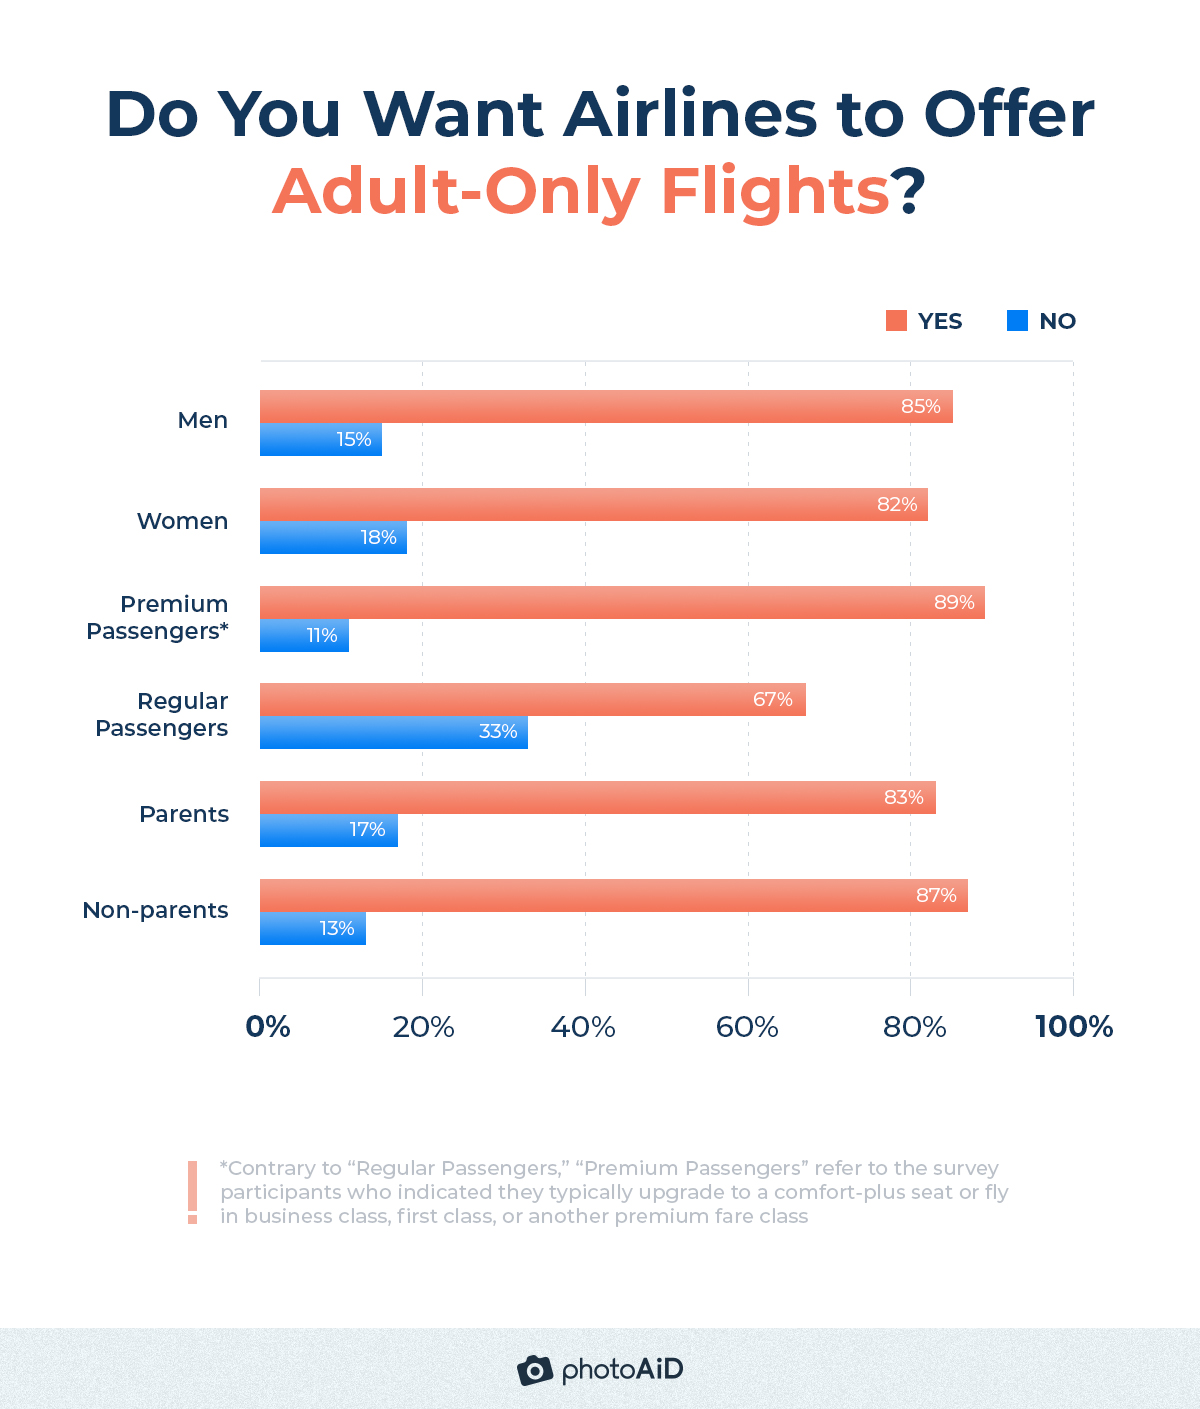 82% of Americans want airlines to offer adult-only flights